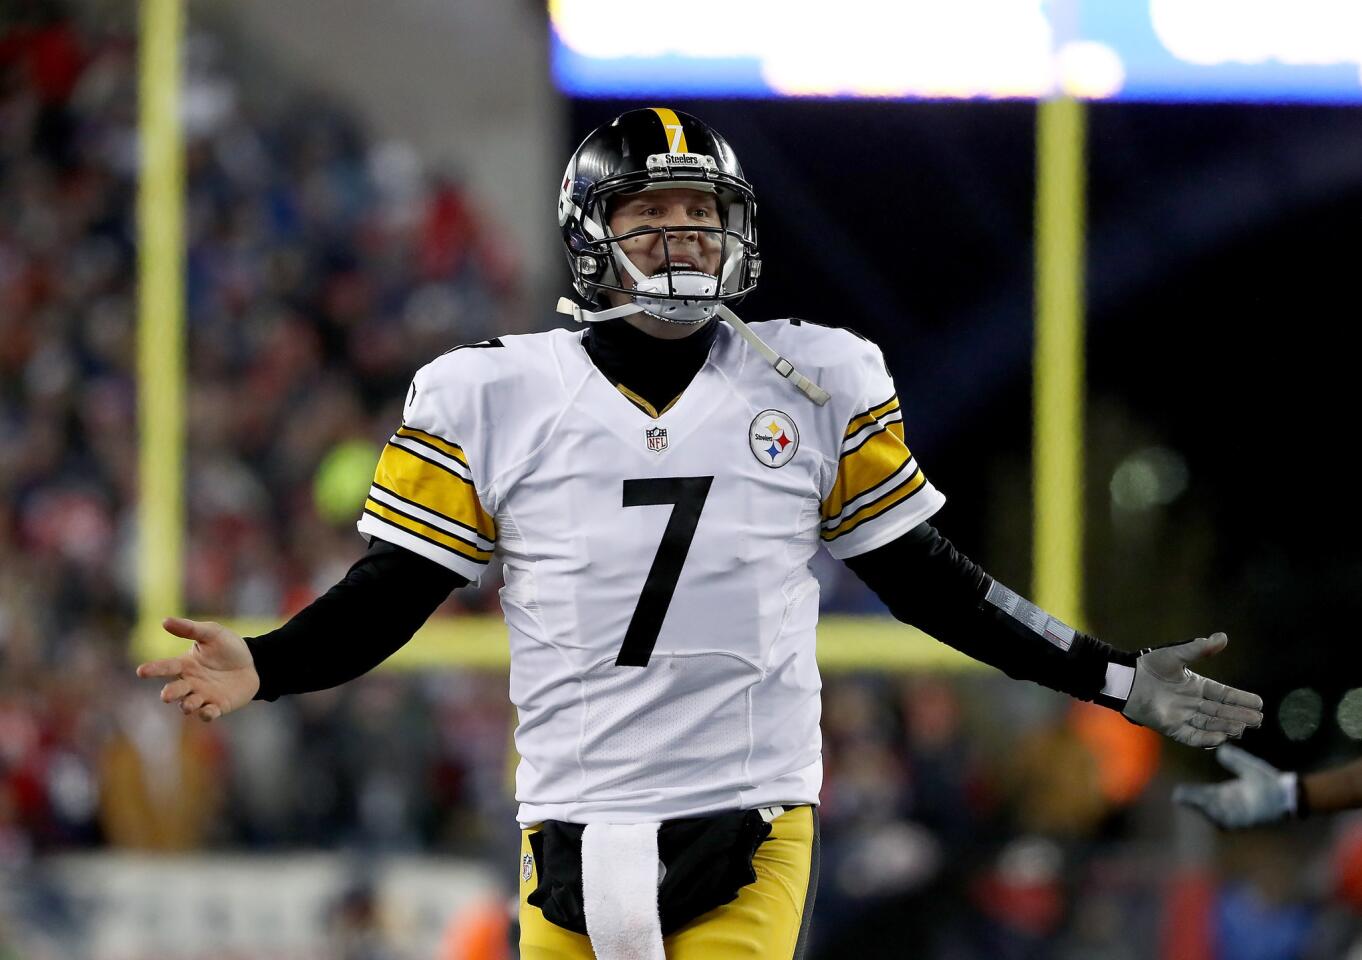 Steelers lose to Patriots in AFC Championship